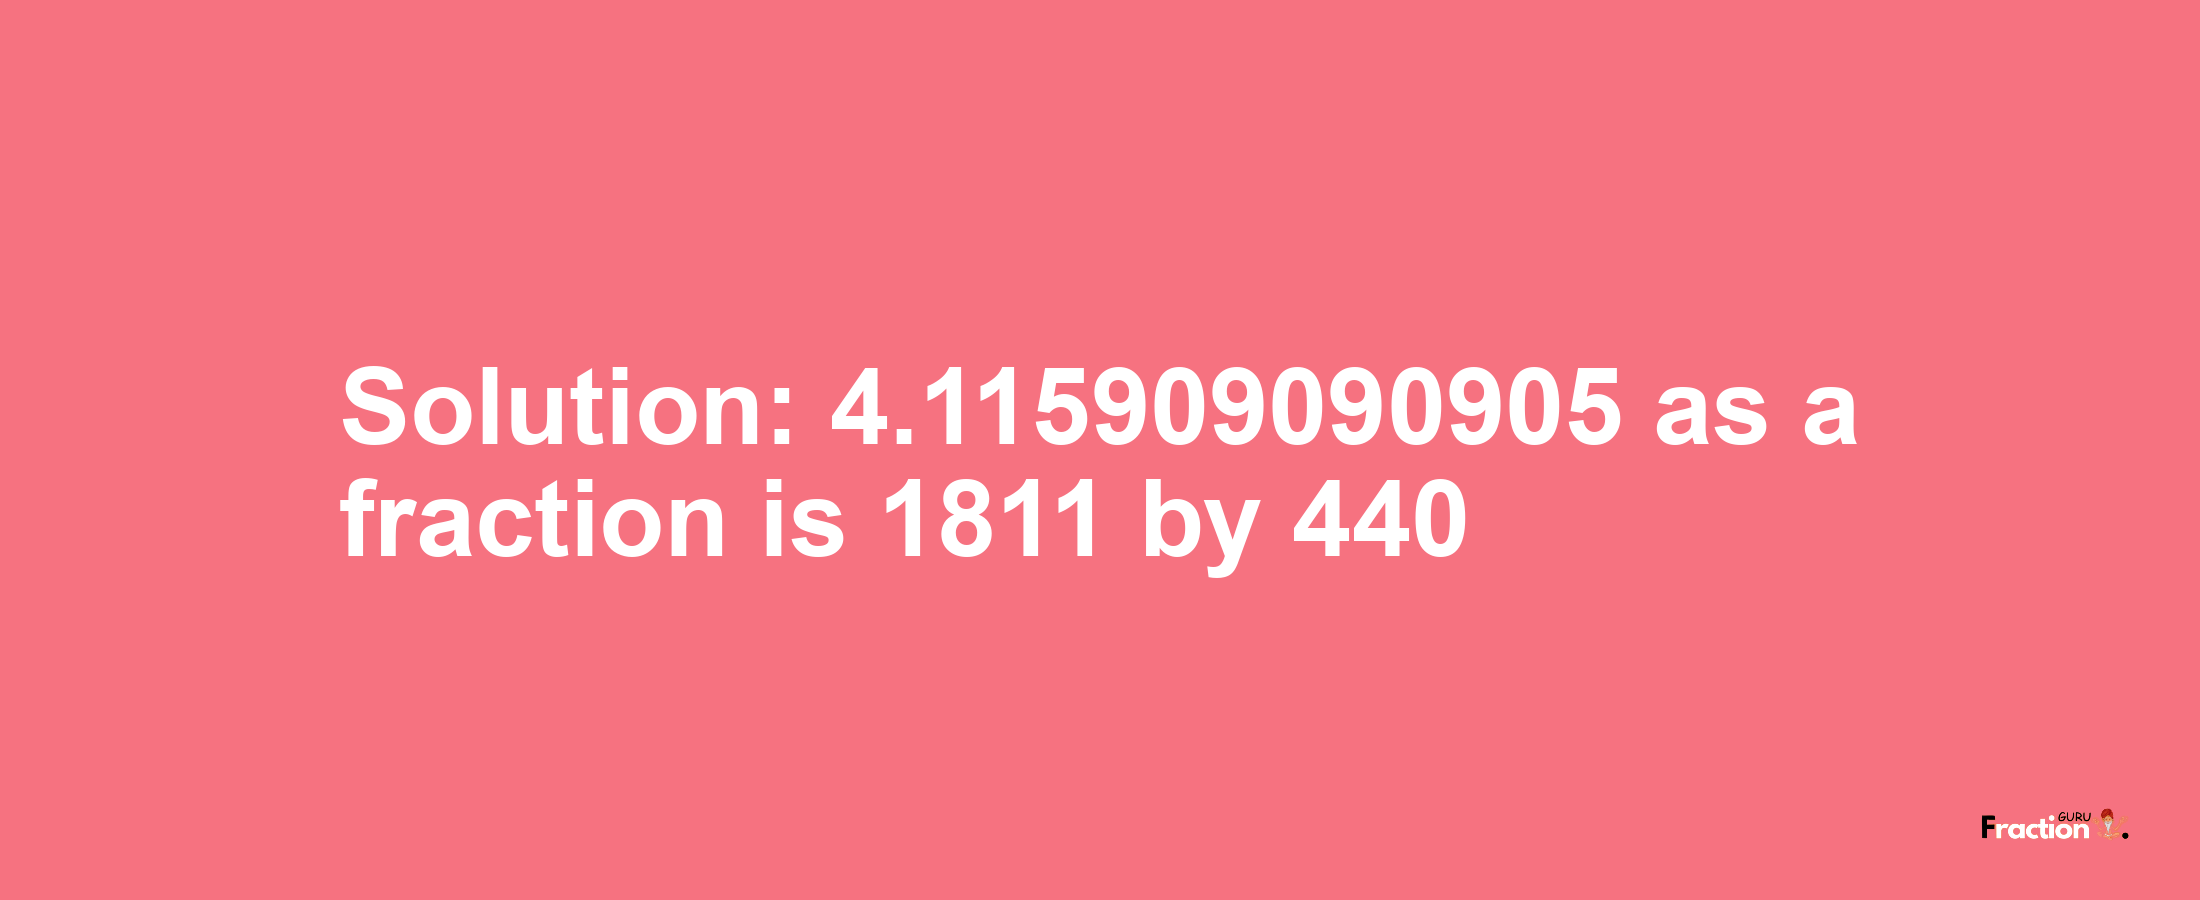 Solution:4.115909090905 as a fraction is 1811/440